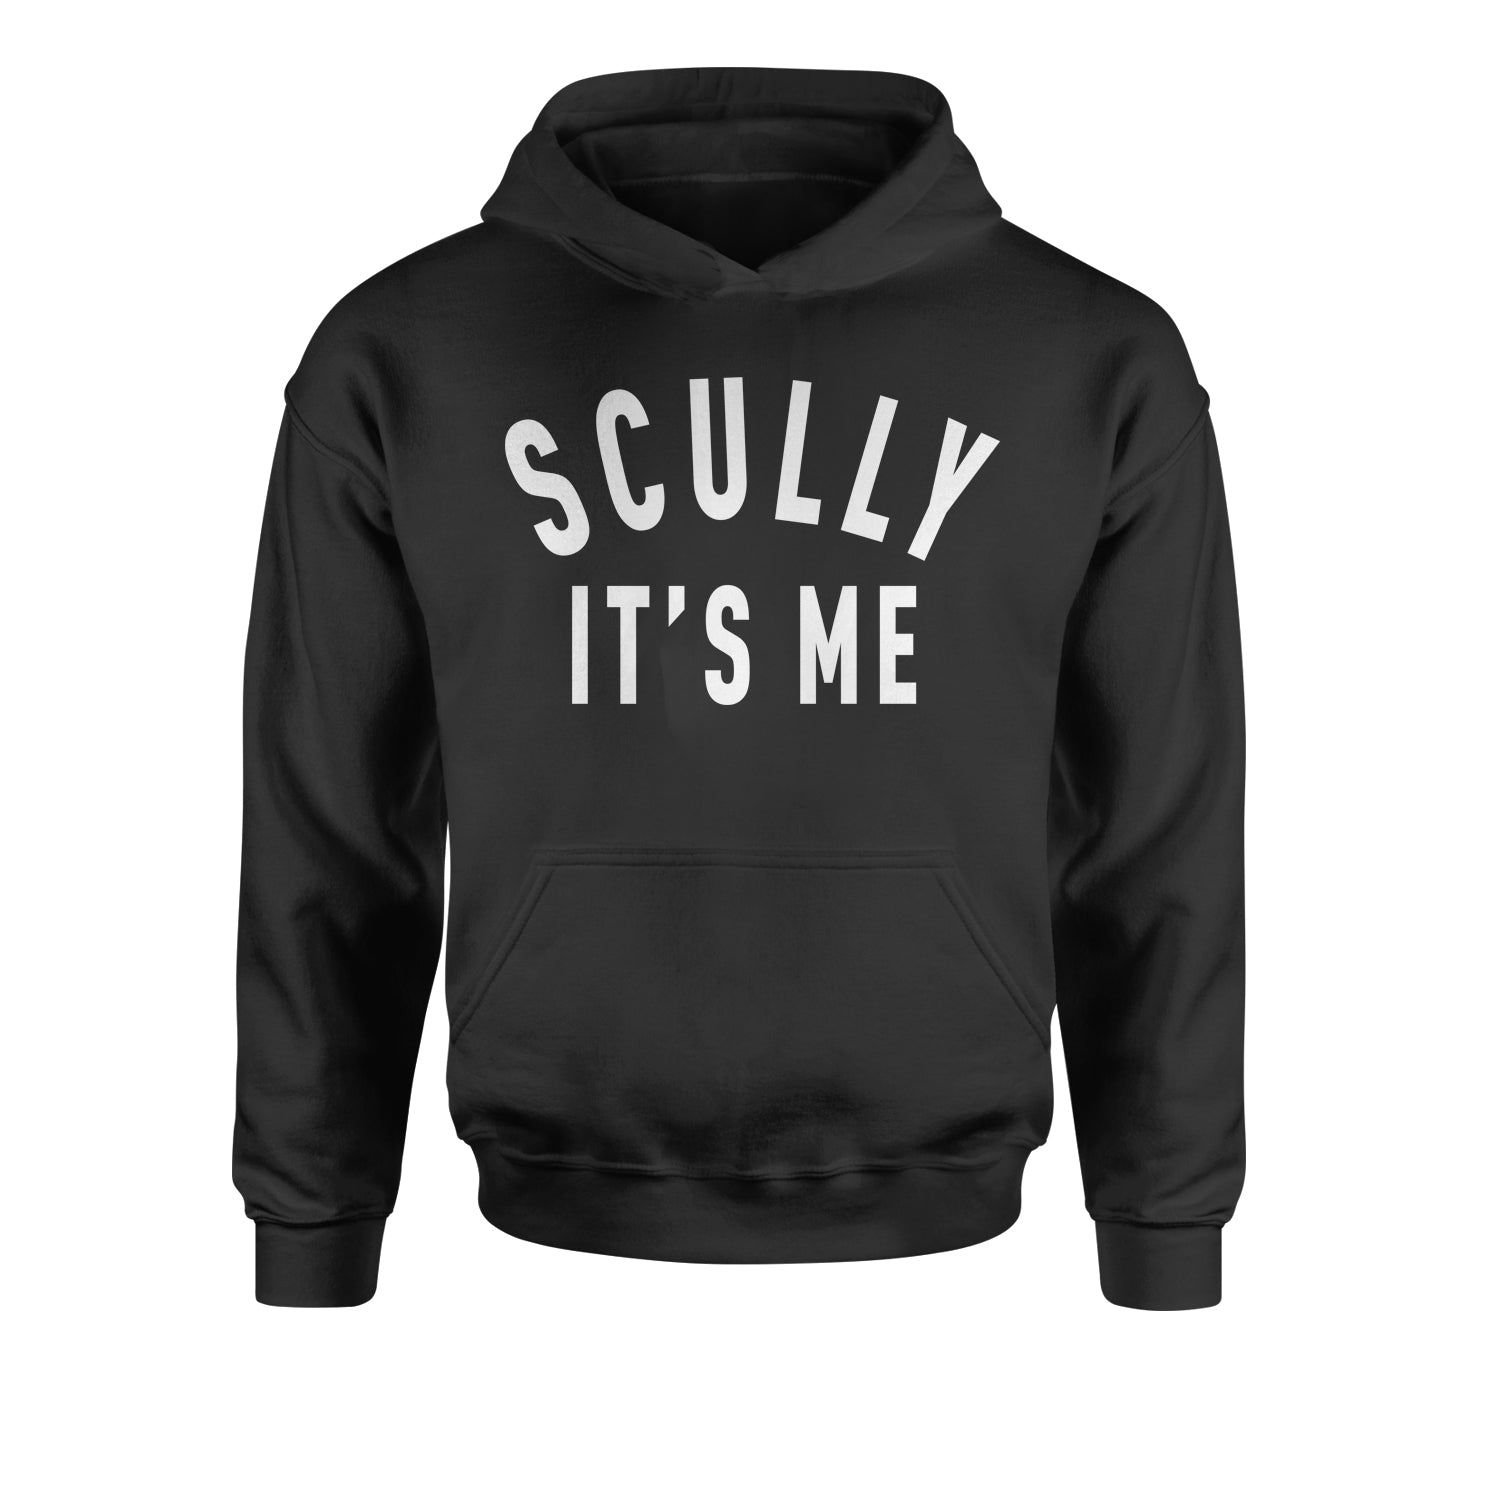 Scully, It's Me Youth-Sized Hoodie #expressiontees by Expression Tees